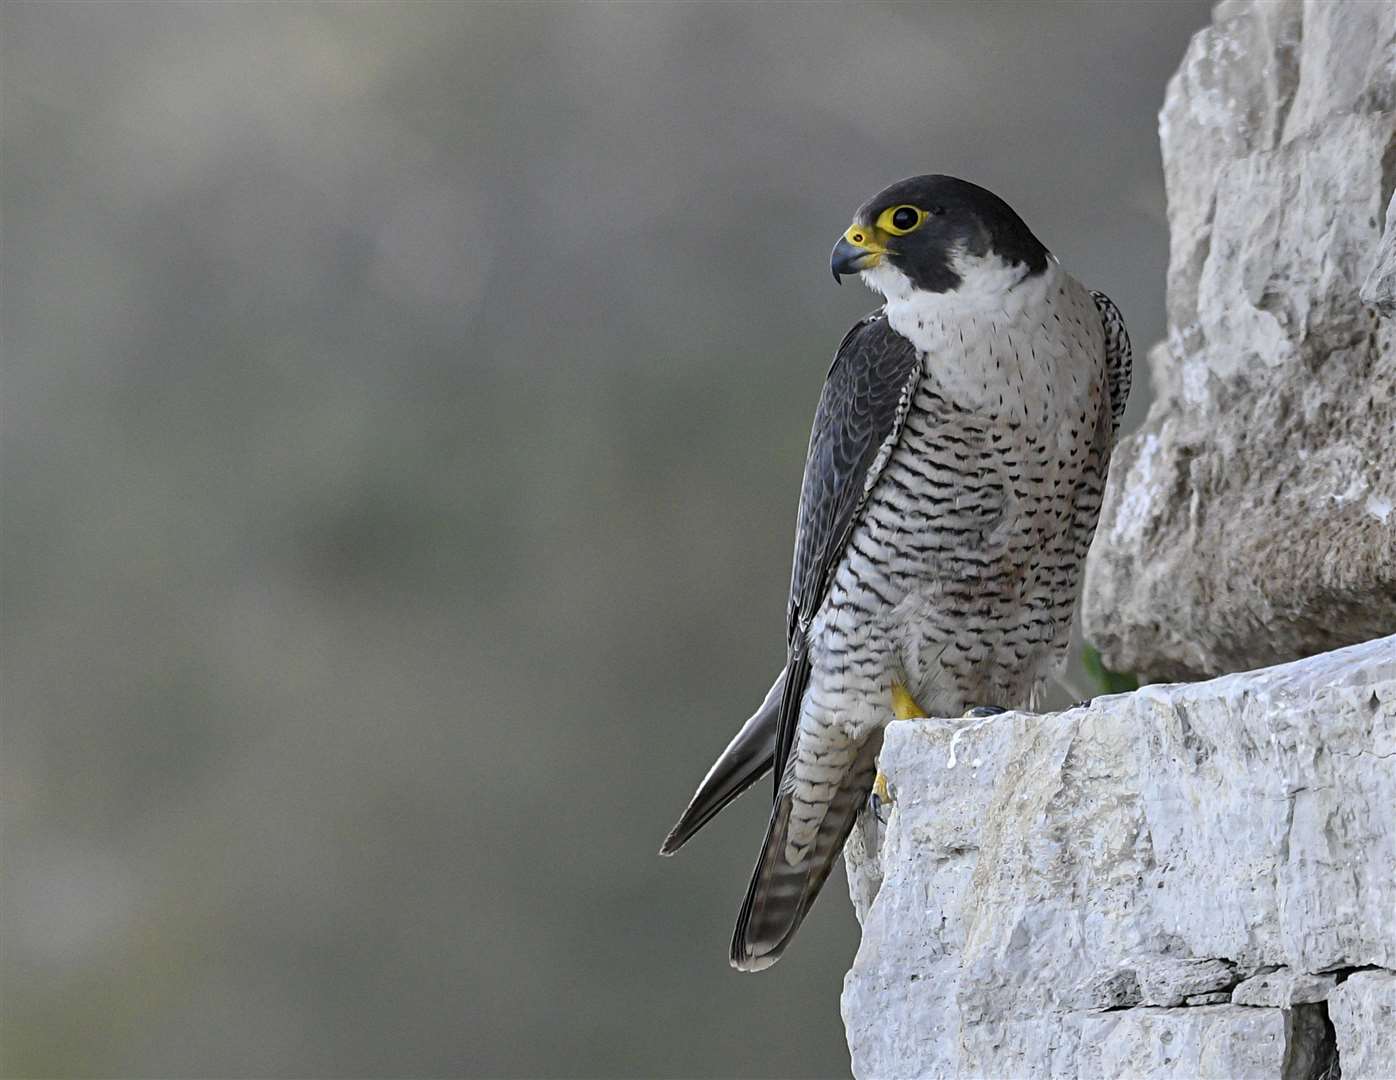 Peregrines like to nest on cliff faces or rocky outcrops away from predators (Verity Hill/RSPB/PA)